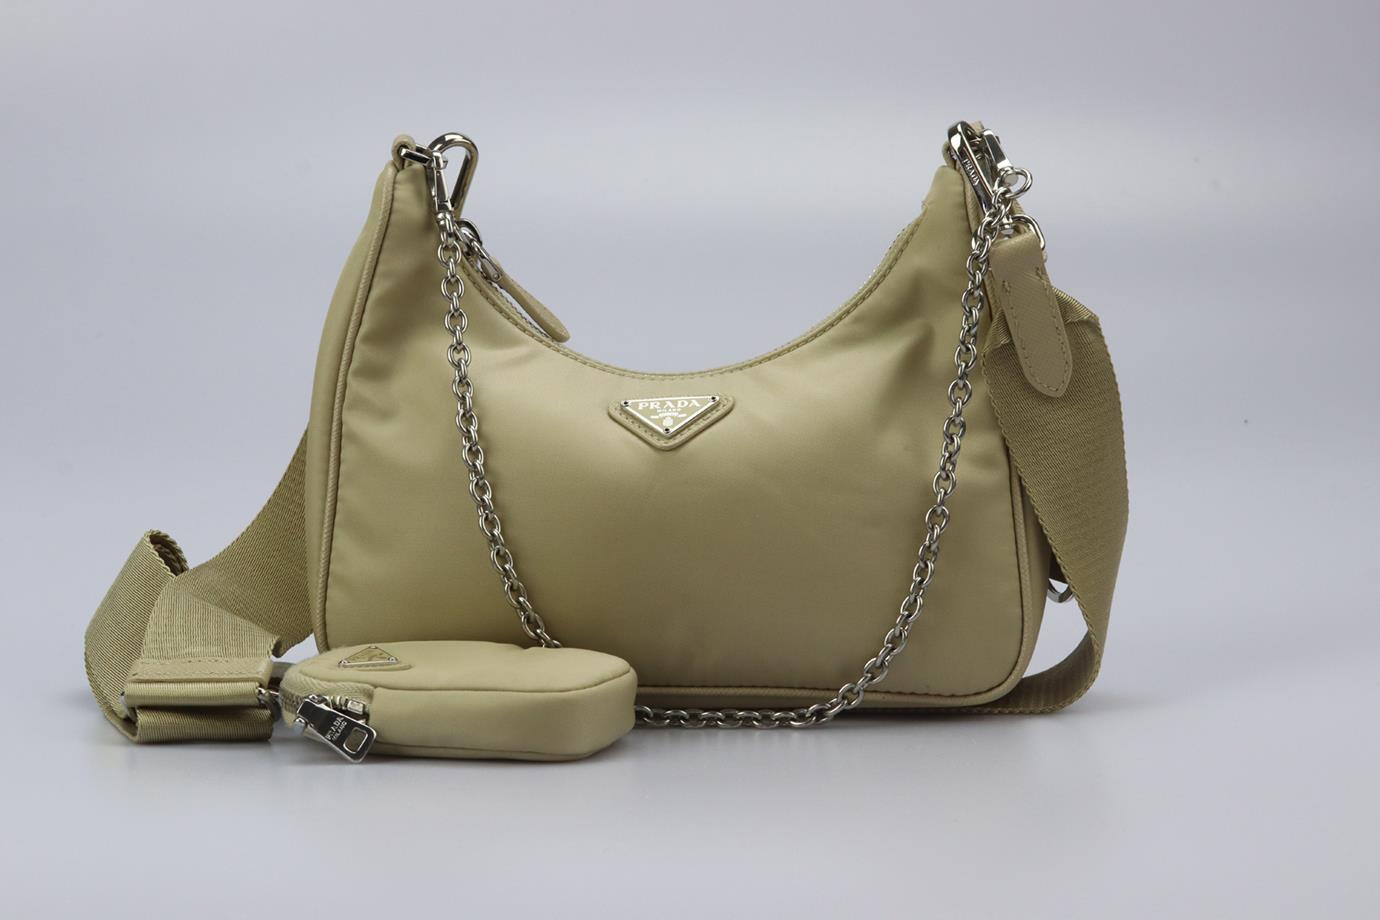 Prada Re-edition 2005 Textured Leather And Nylon Shoulder Bag For